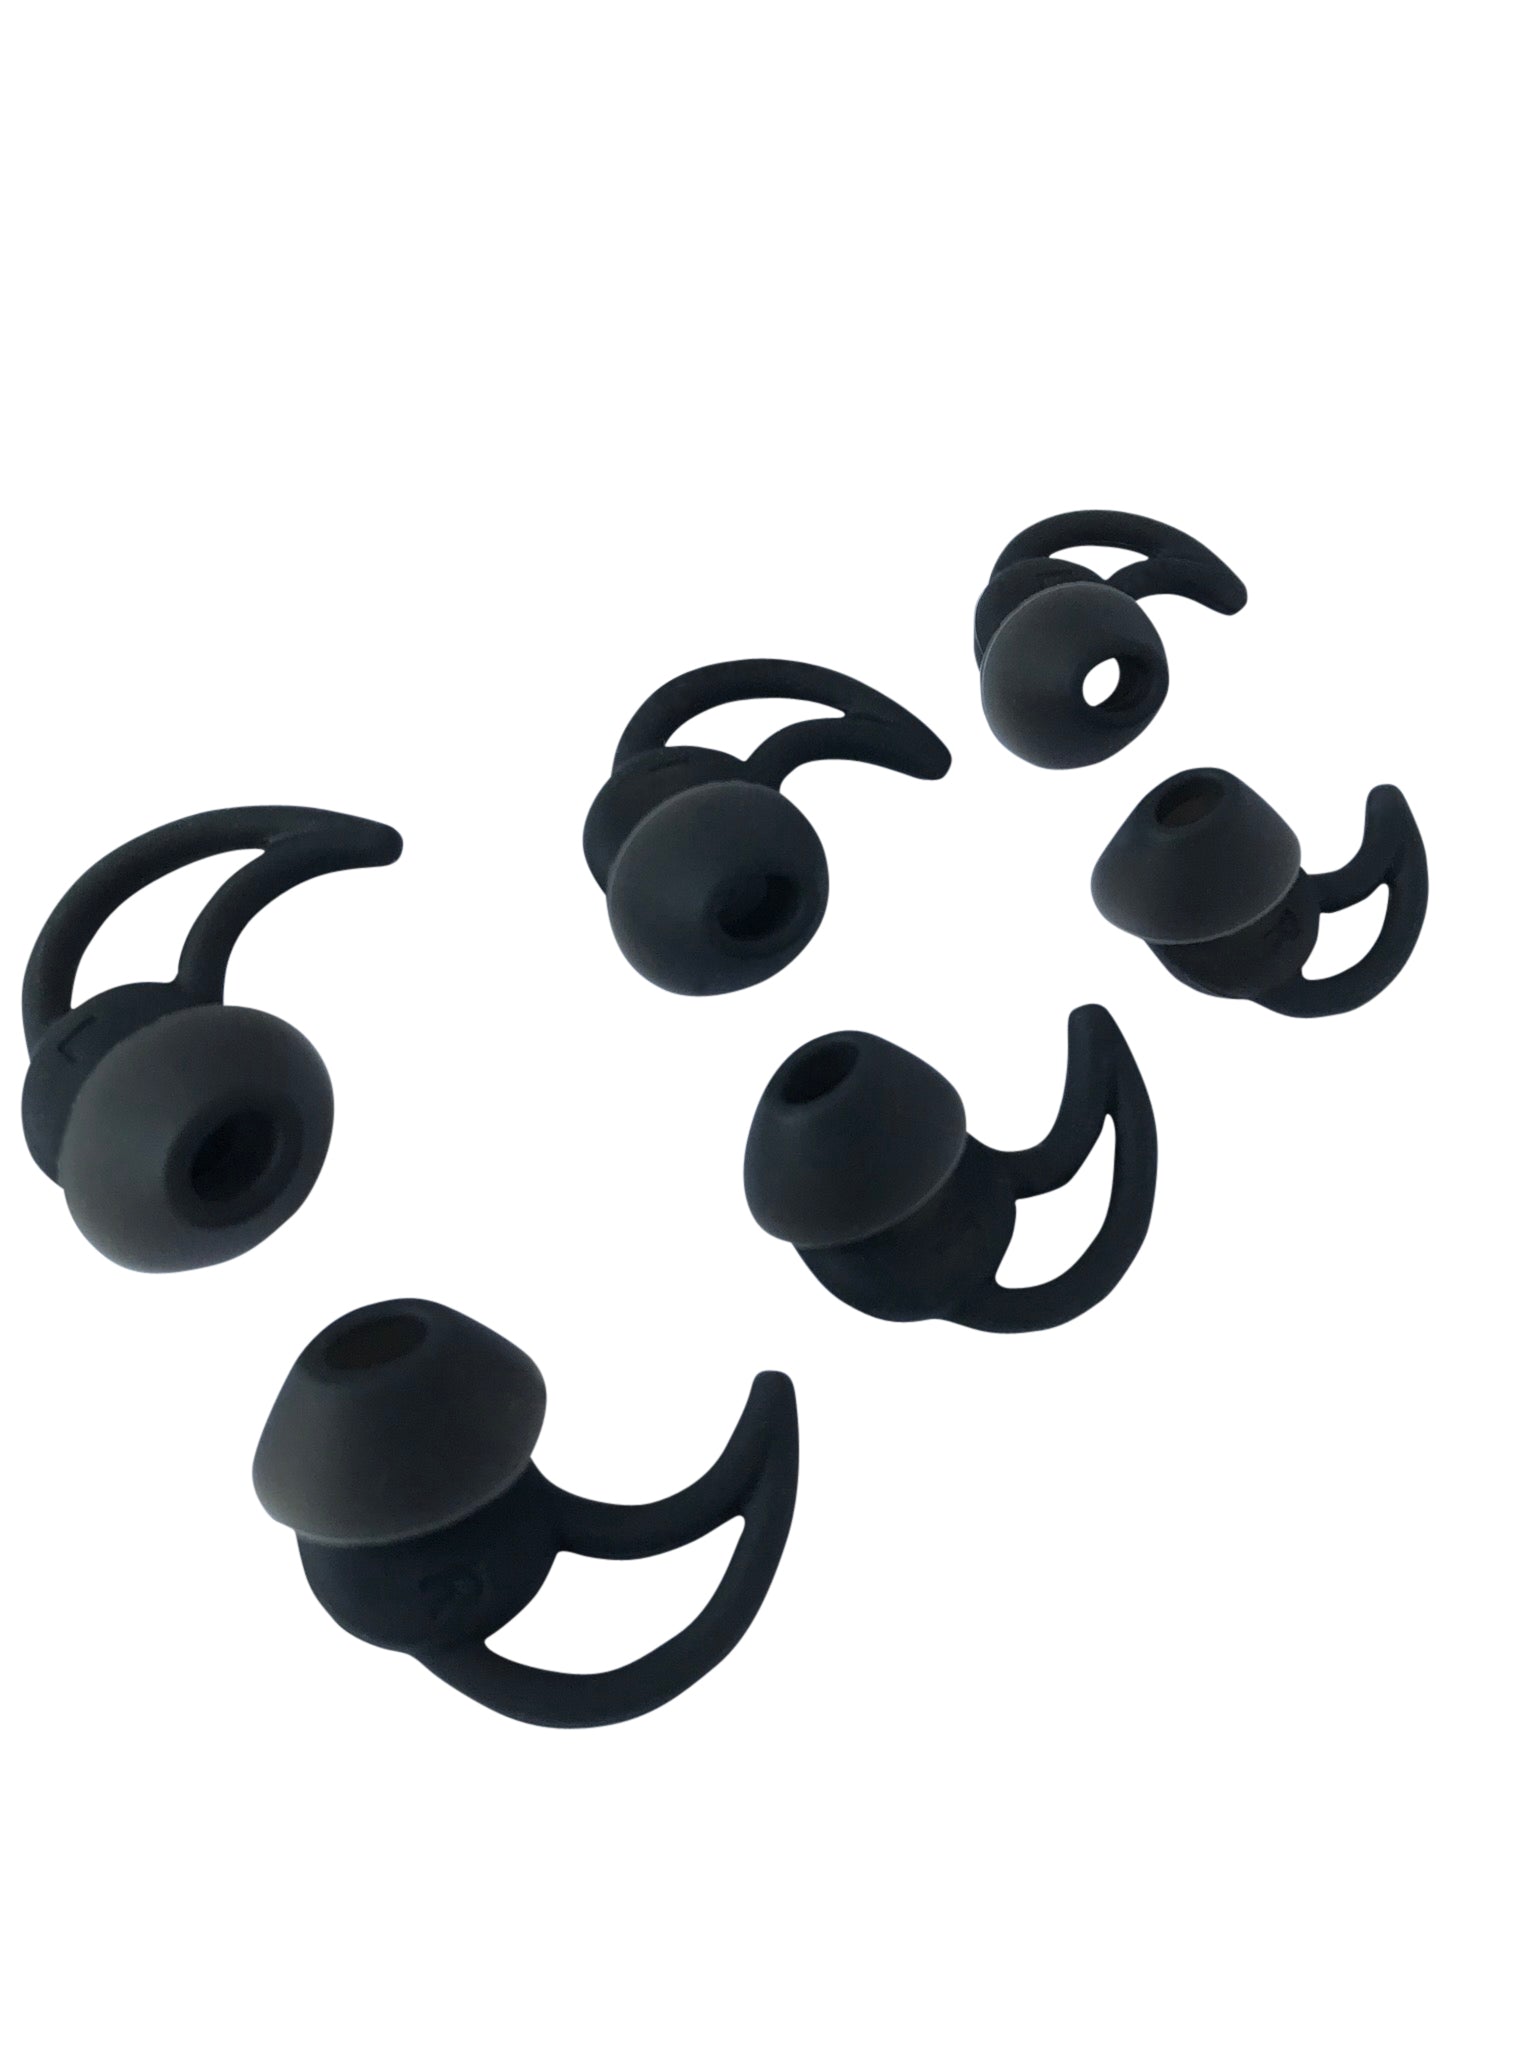 Grape Nordamerika grøntsager Replacement Ear Bud Tips for BOSE QuietControl 30 QC30 Wireless In-Ear